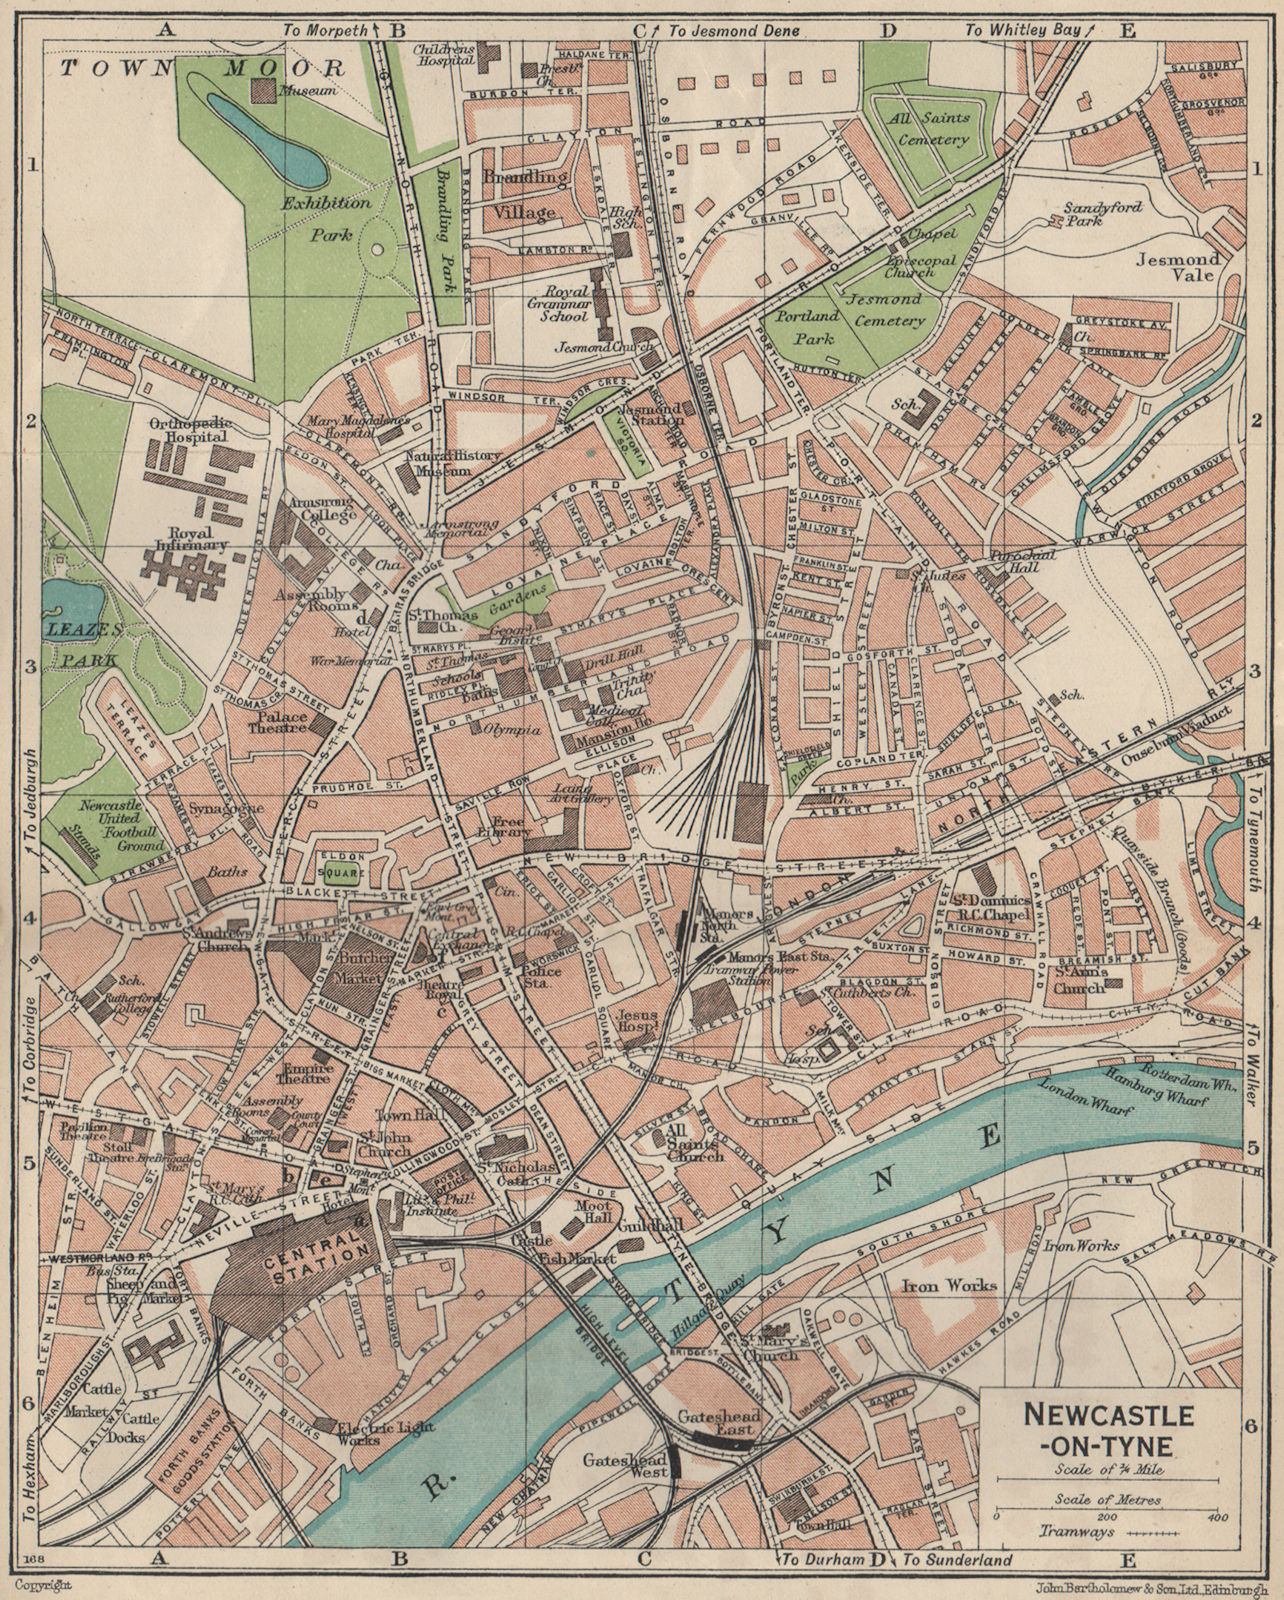 NEWCASTLE-ON-TYNE. Vintage town city map plan. Northumberland 1939 old